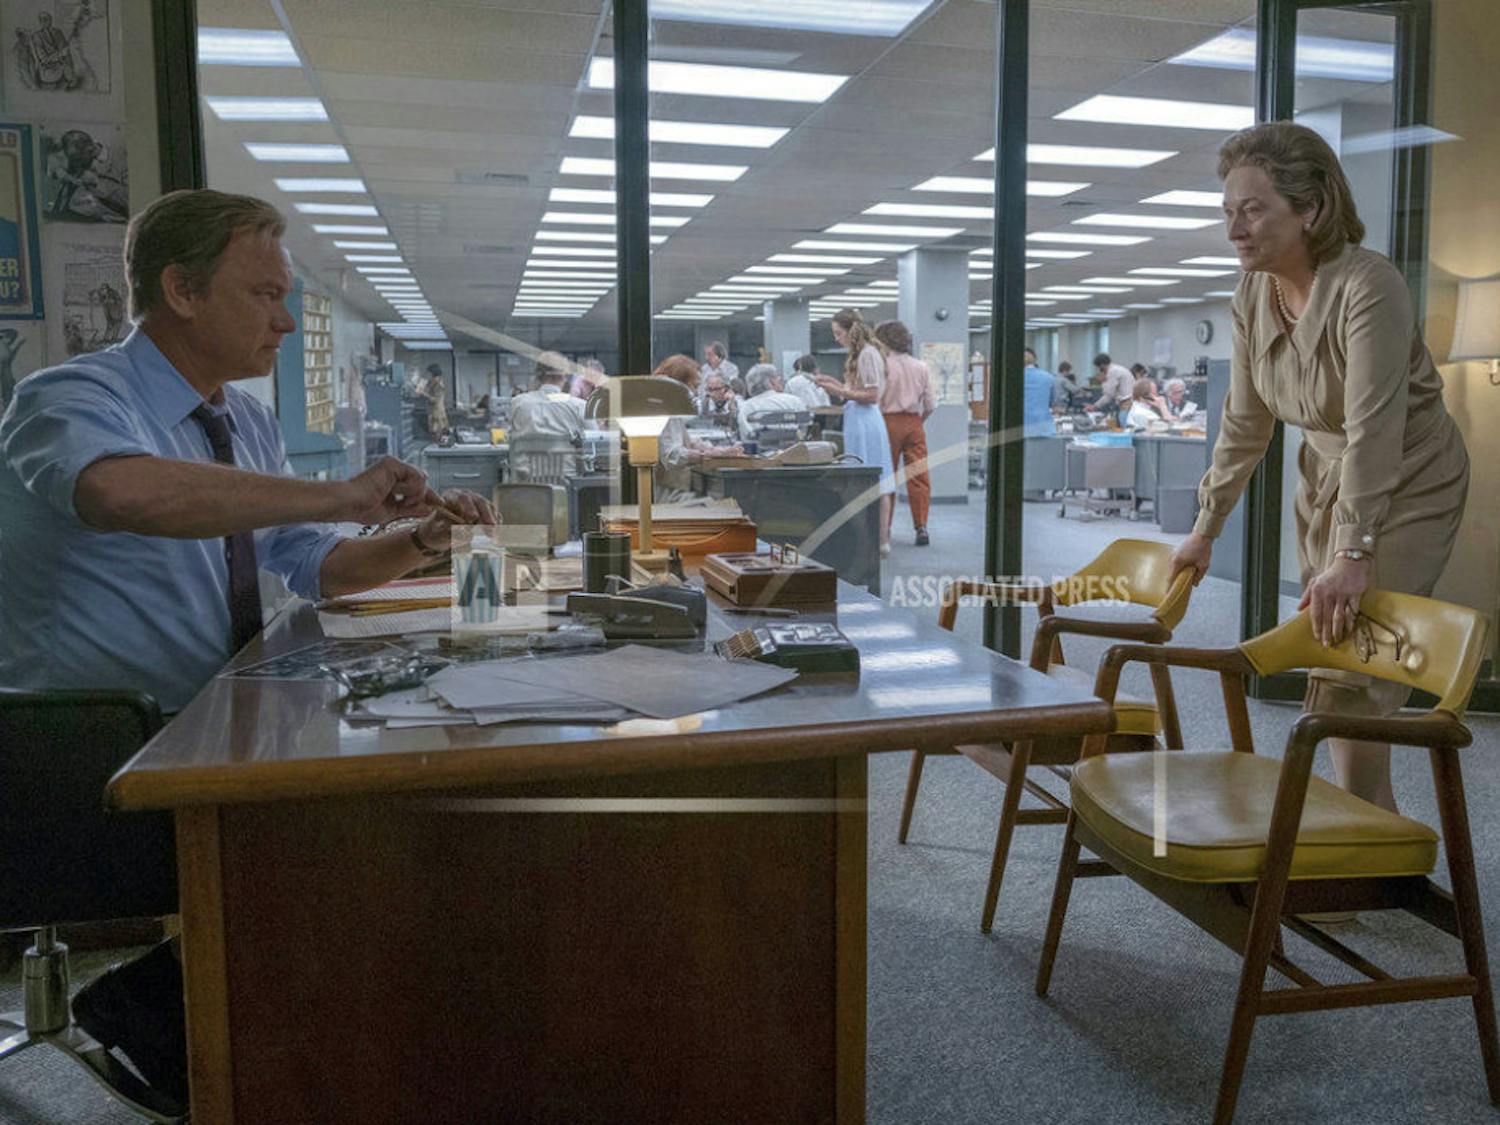 In this image released by 20th Century Fox, Tom Hanks portrays Ben Bradlee, left, and Meryl Streep portrays Katharine Graham in a scene from "The Post." (Niko Tavernise/20th Century Fox via AP)